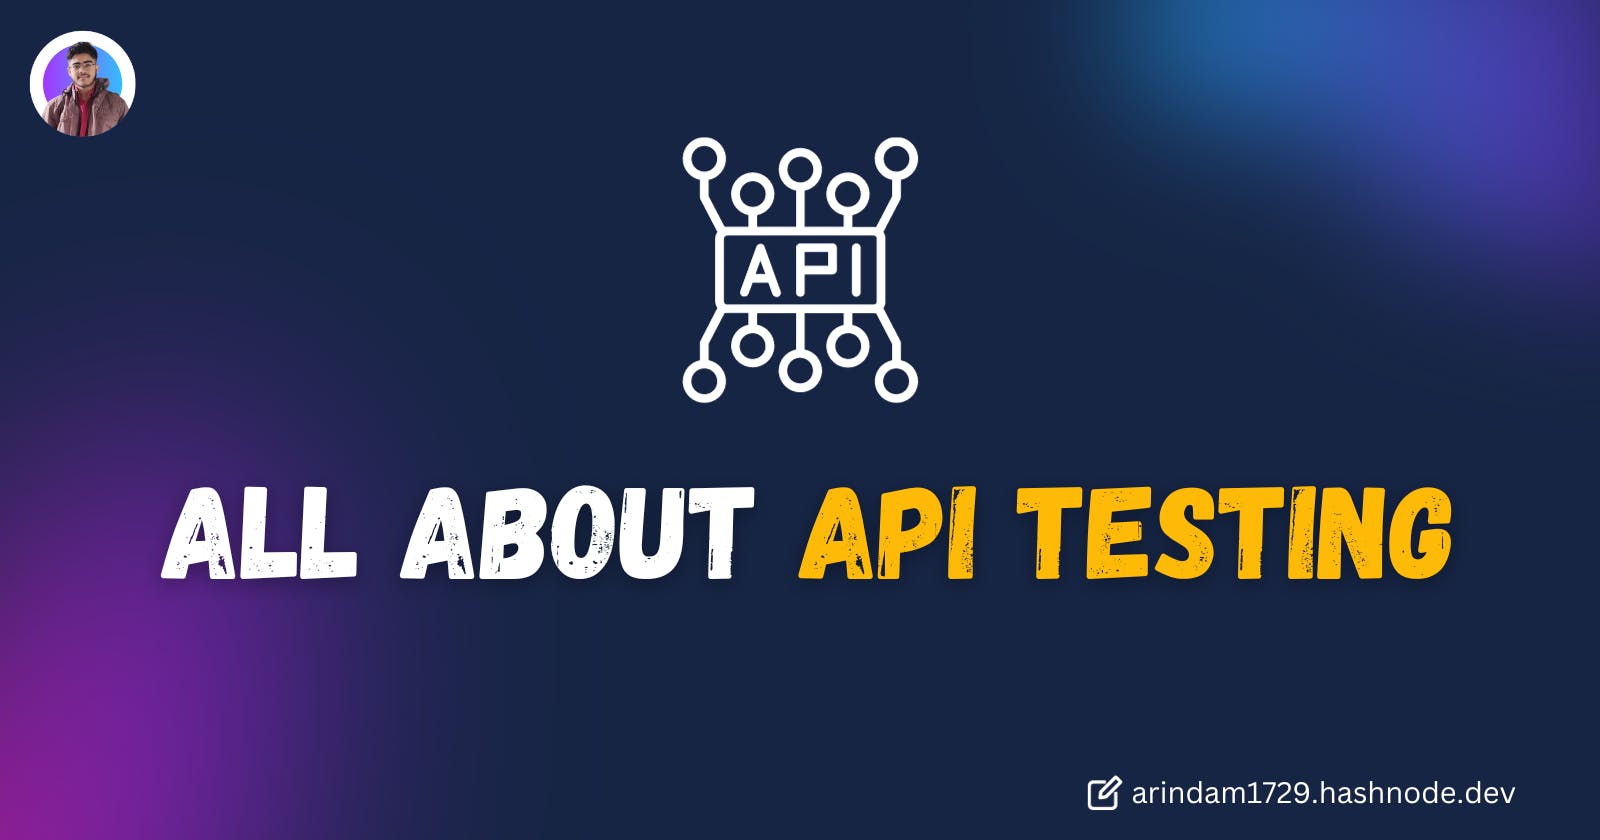 All about API testing & Keploy